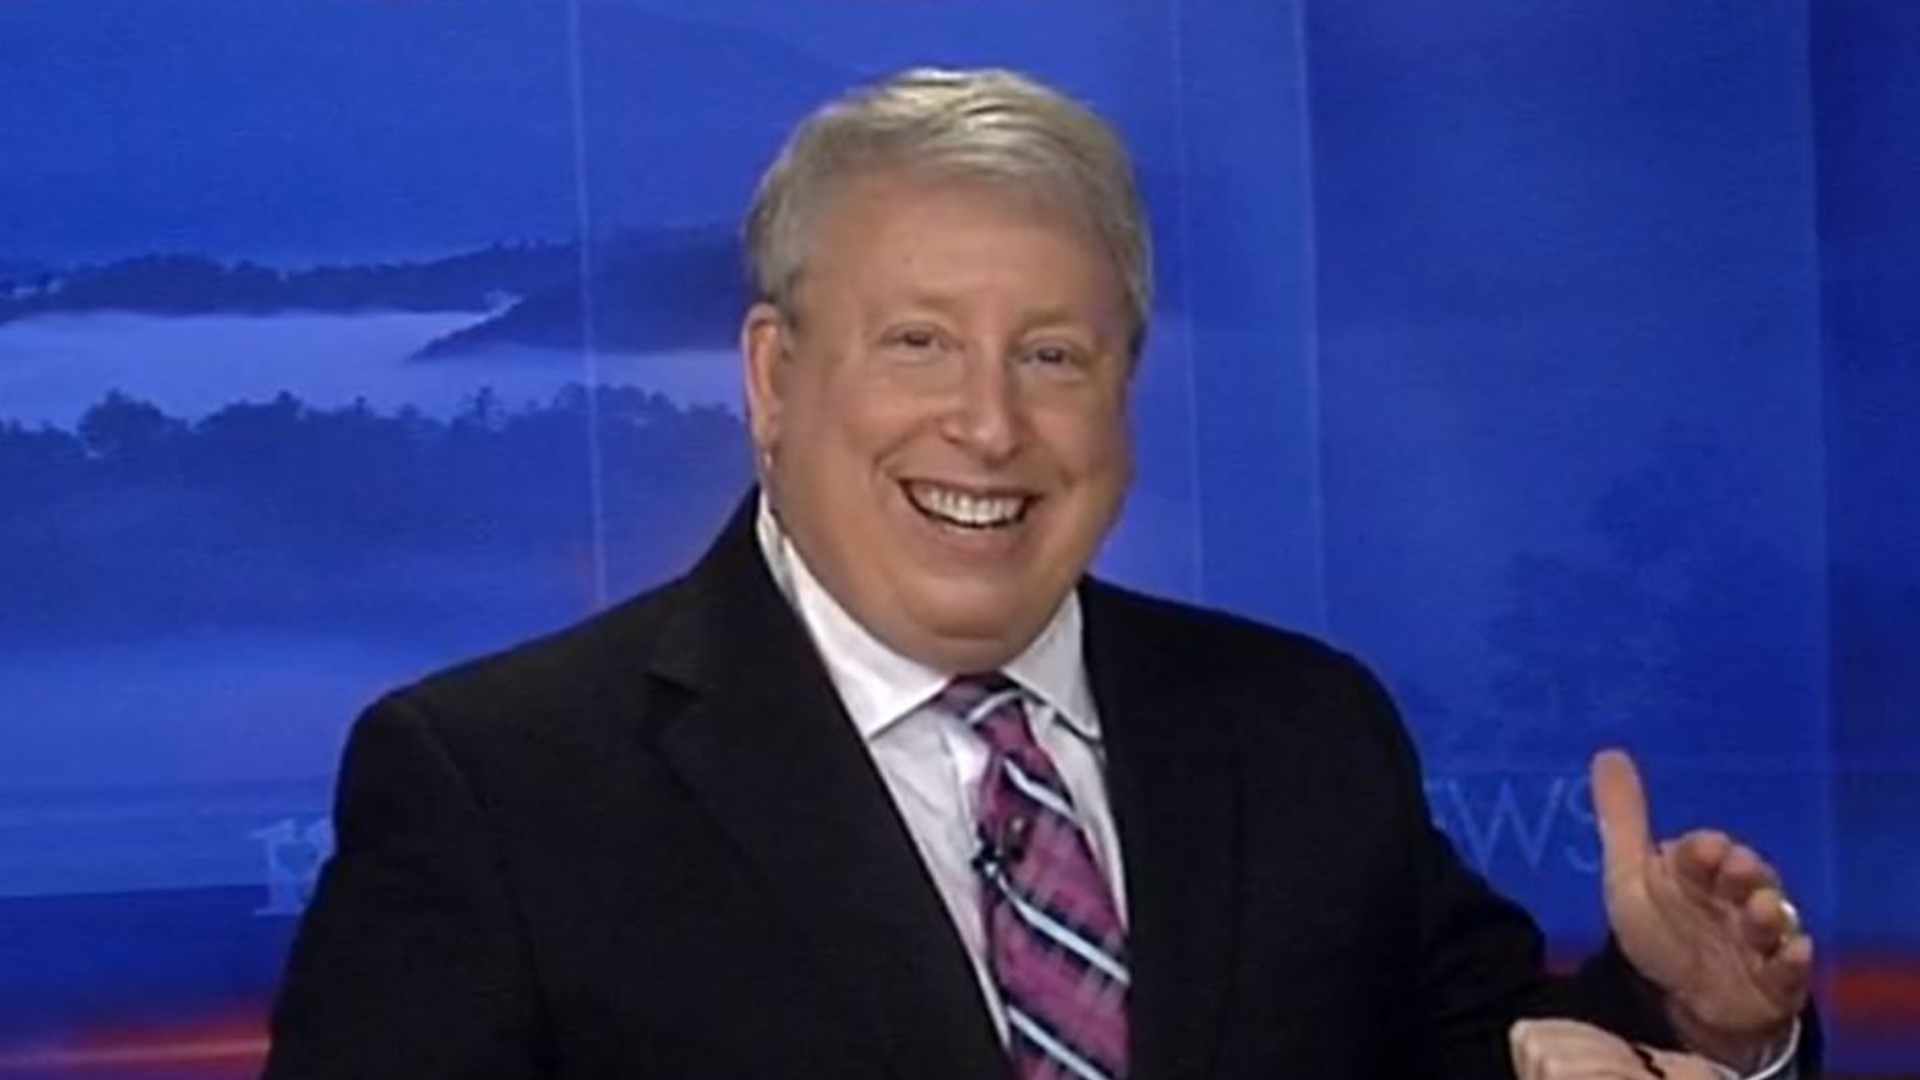 He came to East Tennessee in 1997 and quickly became popular with viewers as he delivered his weather forecasts, first on WATE and then on WBIR.